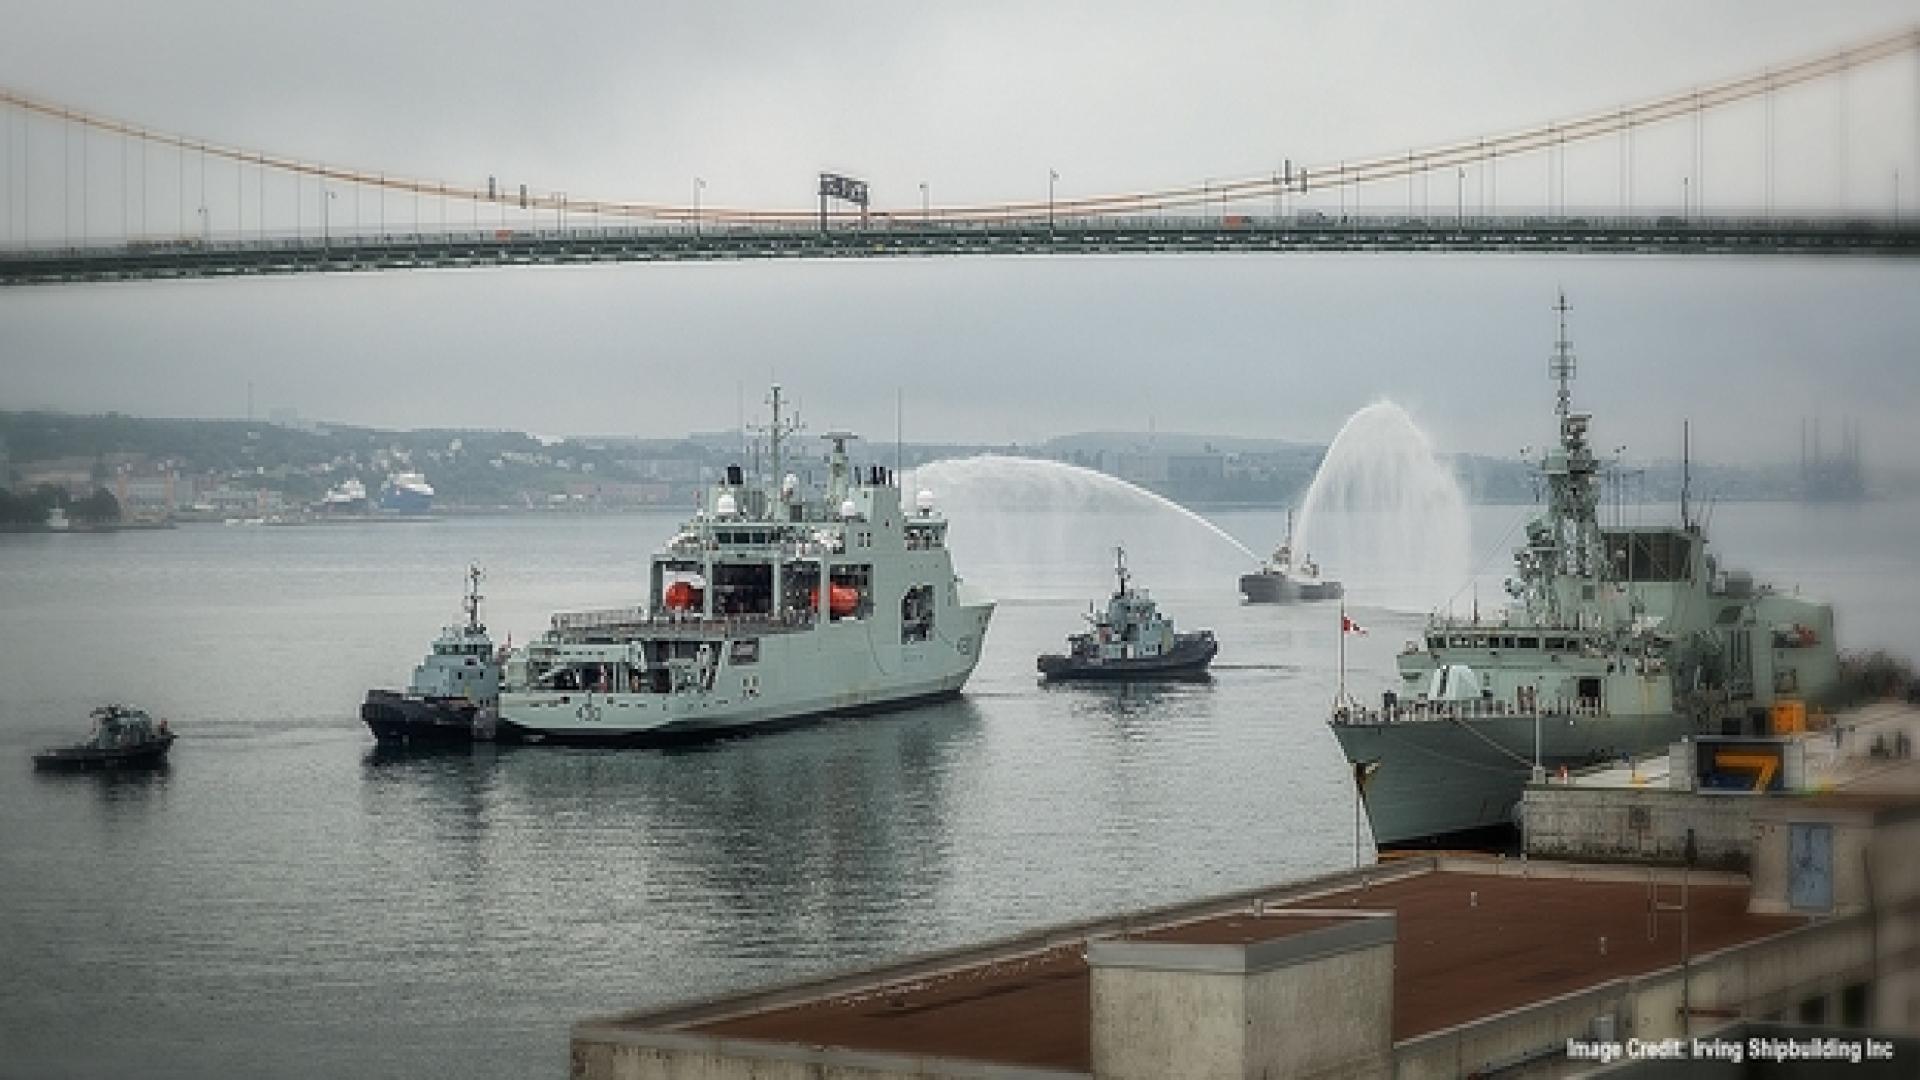 Royal Canadian Navy’s First Arctic and Offshore Patrol Ship (AOPS), HMCS Harry DeWolf - Powered by GE